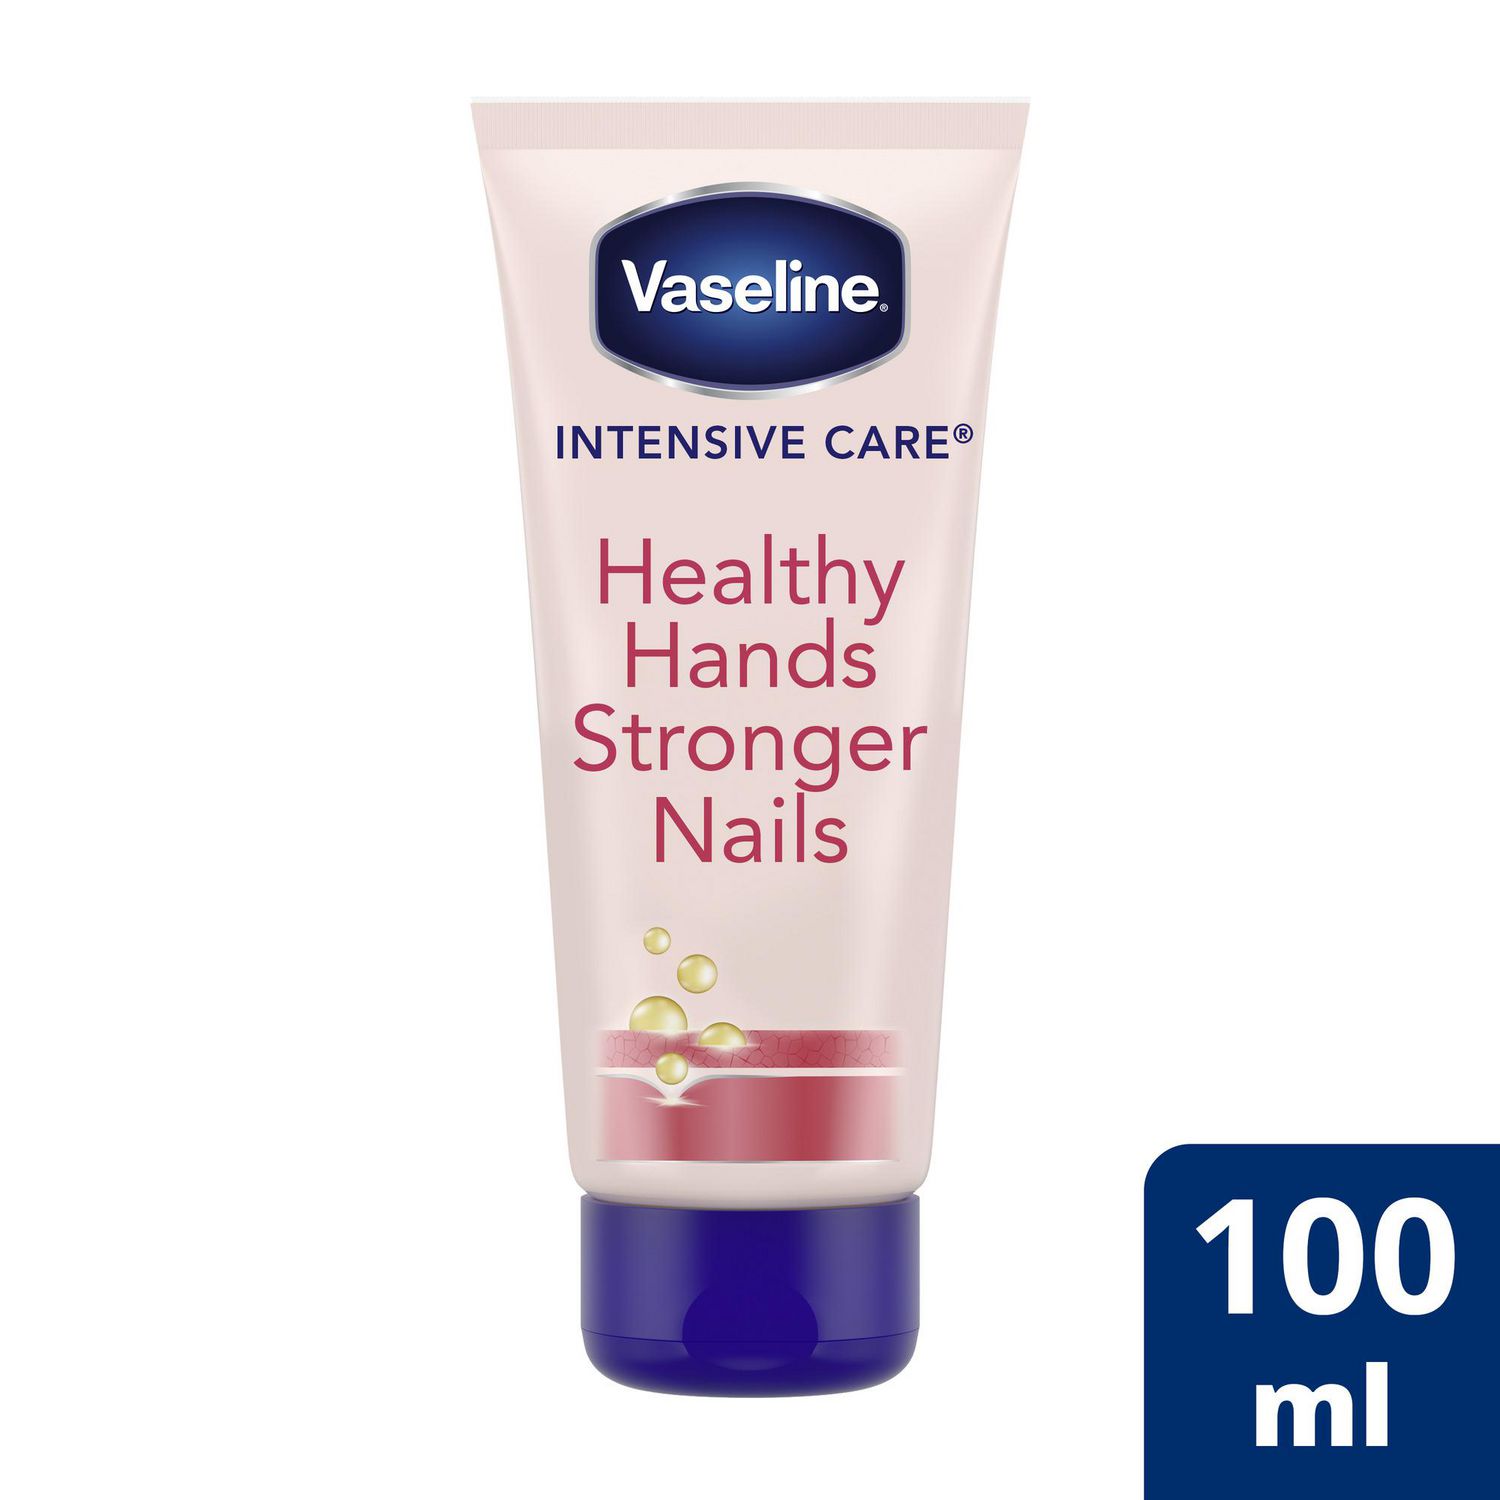 Vaseline Intensive Care Healthy Hands and Stronger Nails Lotion - 100 ml